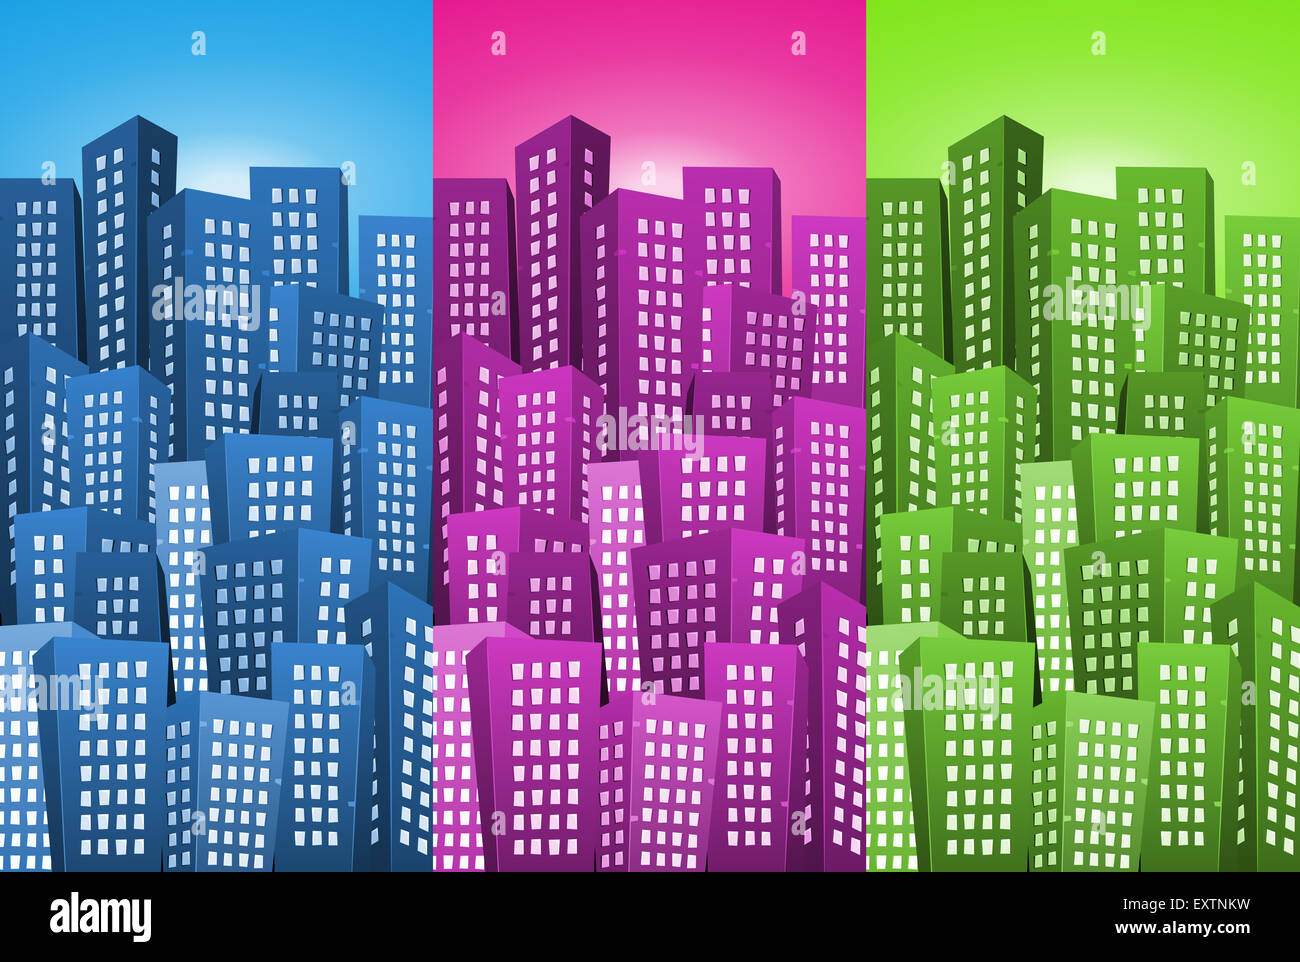 Illustration of a set of cartoon high cityscape backgrounds with blue, pink and green colors Stock Photo